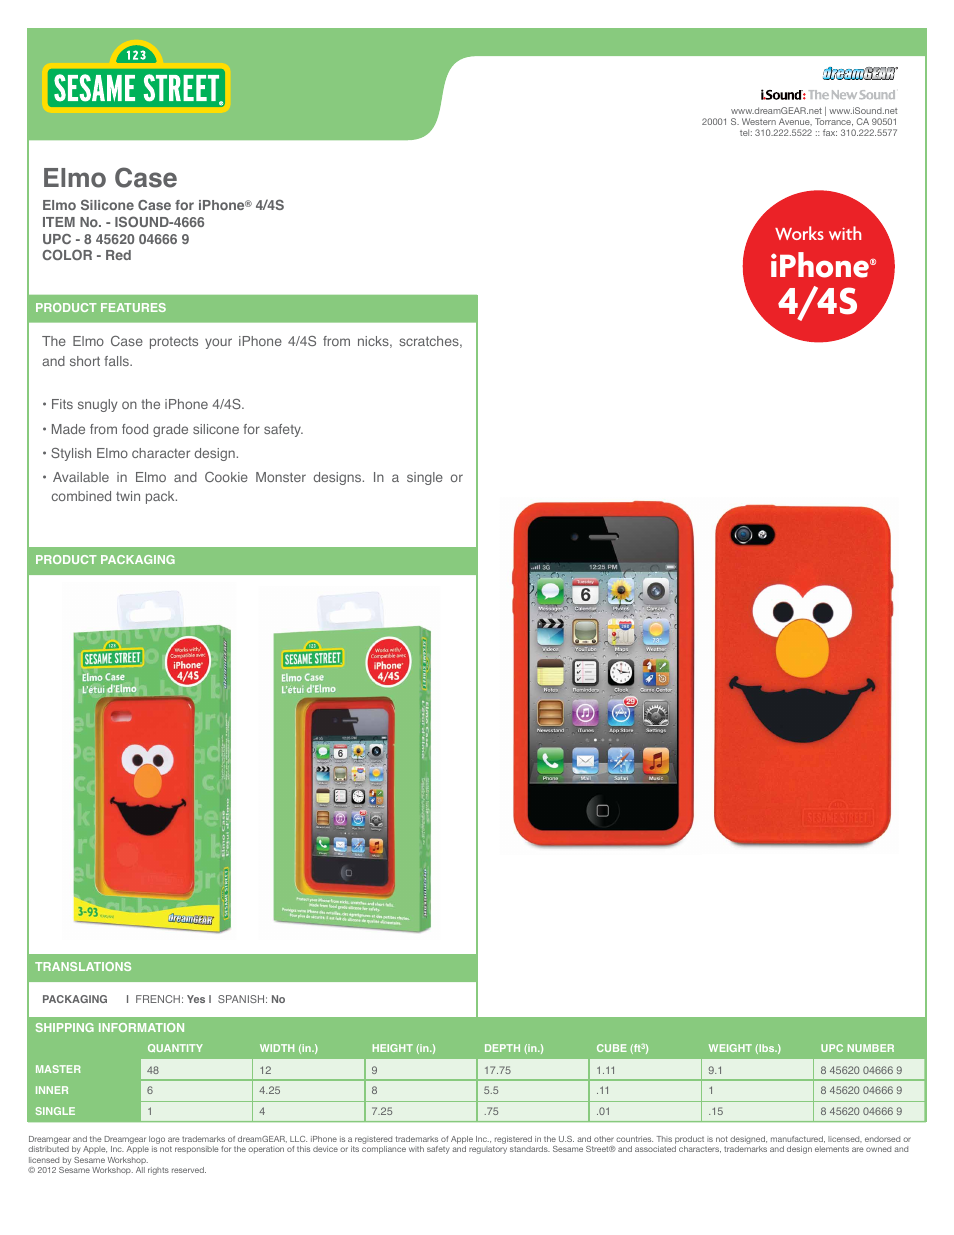 Elmo Case for iPhone 4-4S - Sell Sheet